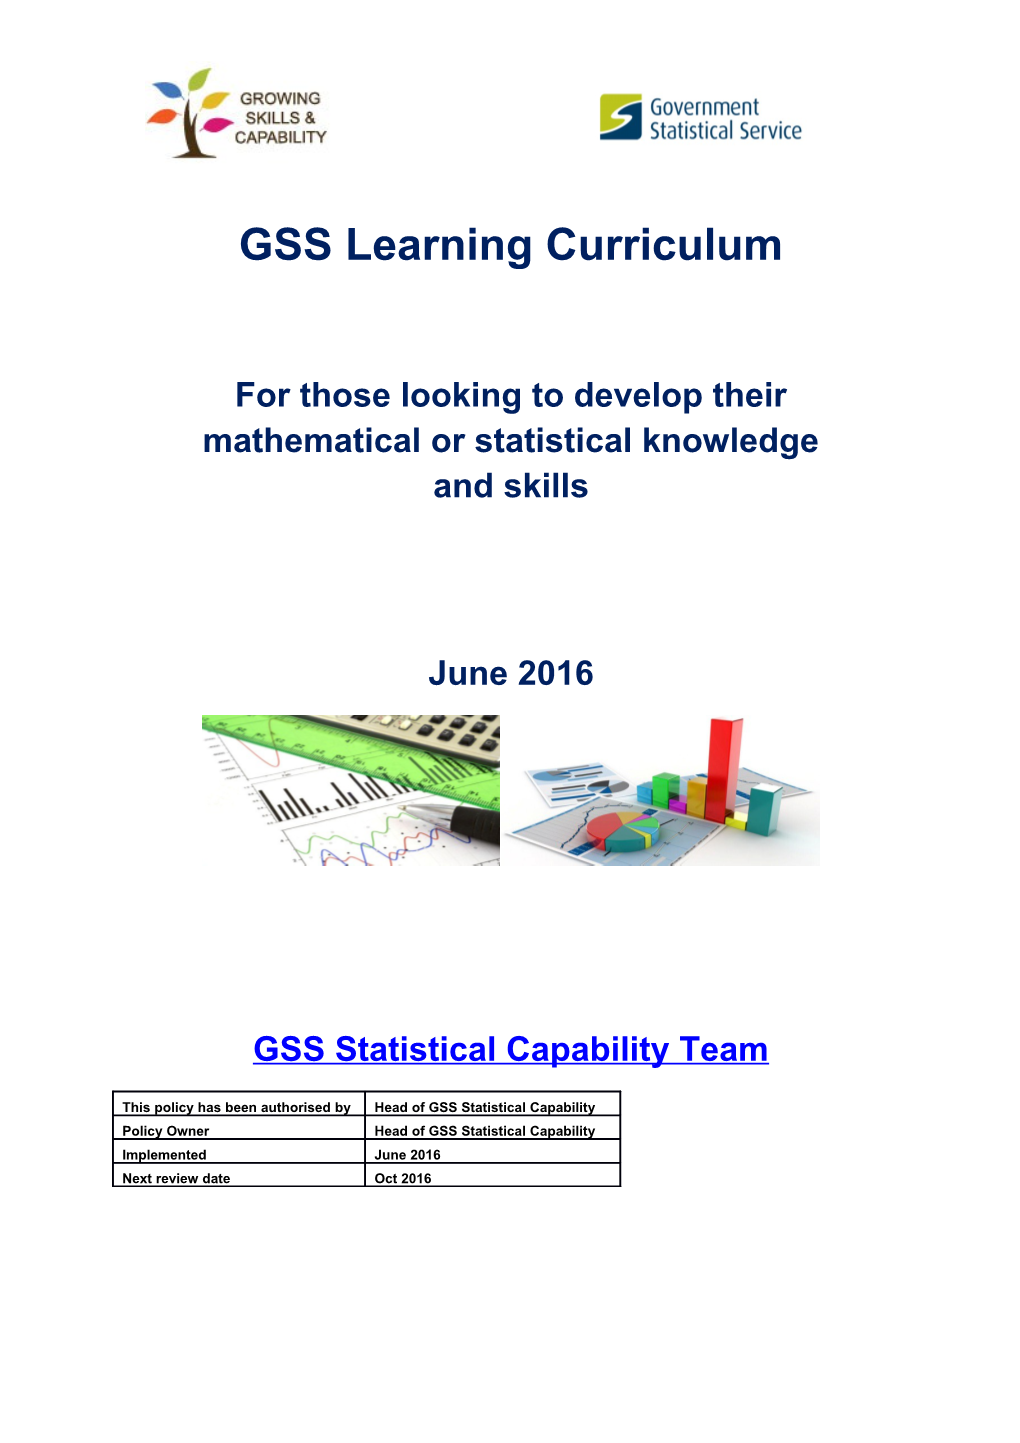 For Those Looking to Develop Their Mathematical Or Statistical Knowledge and Skills